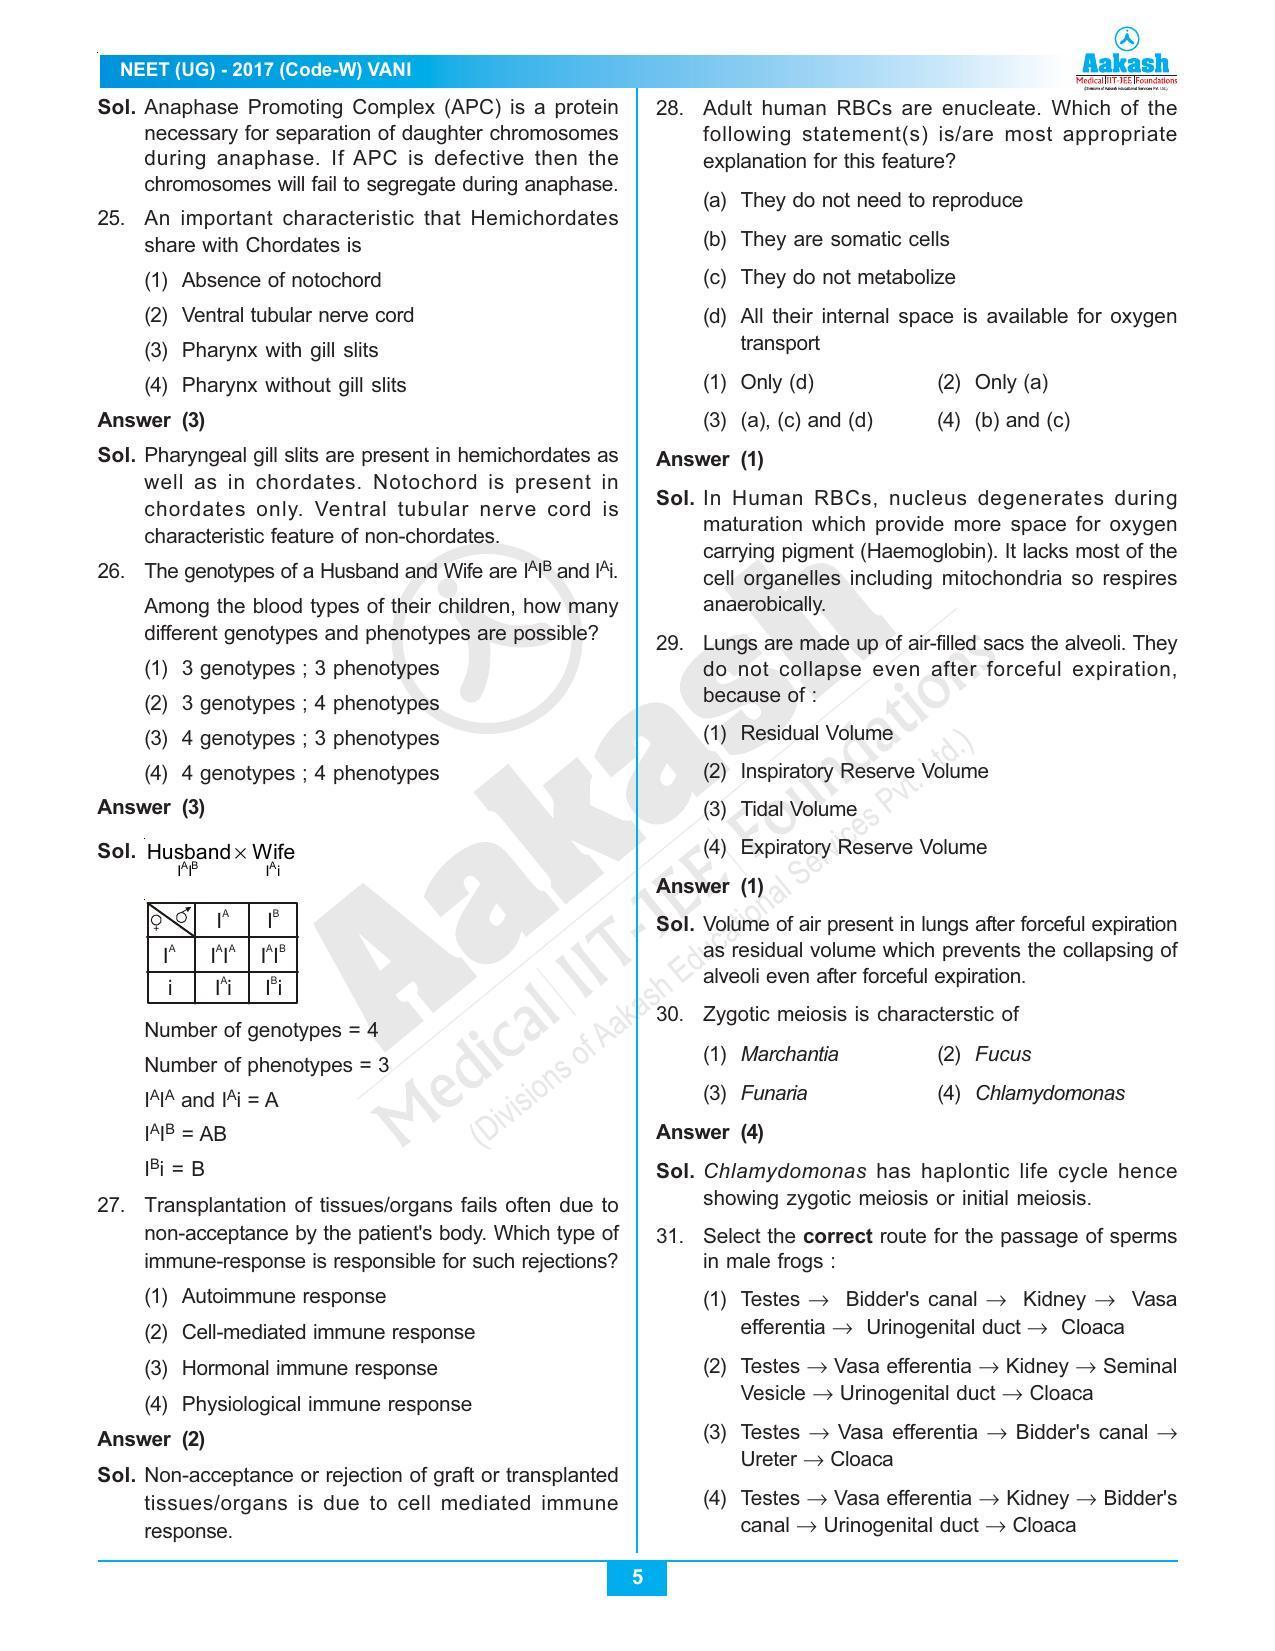  NEET Code W 2017 Answer & Solutions - Page 5